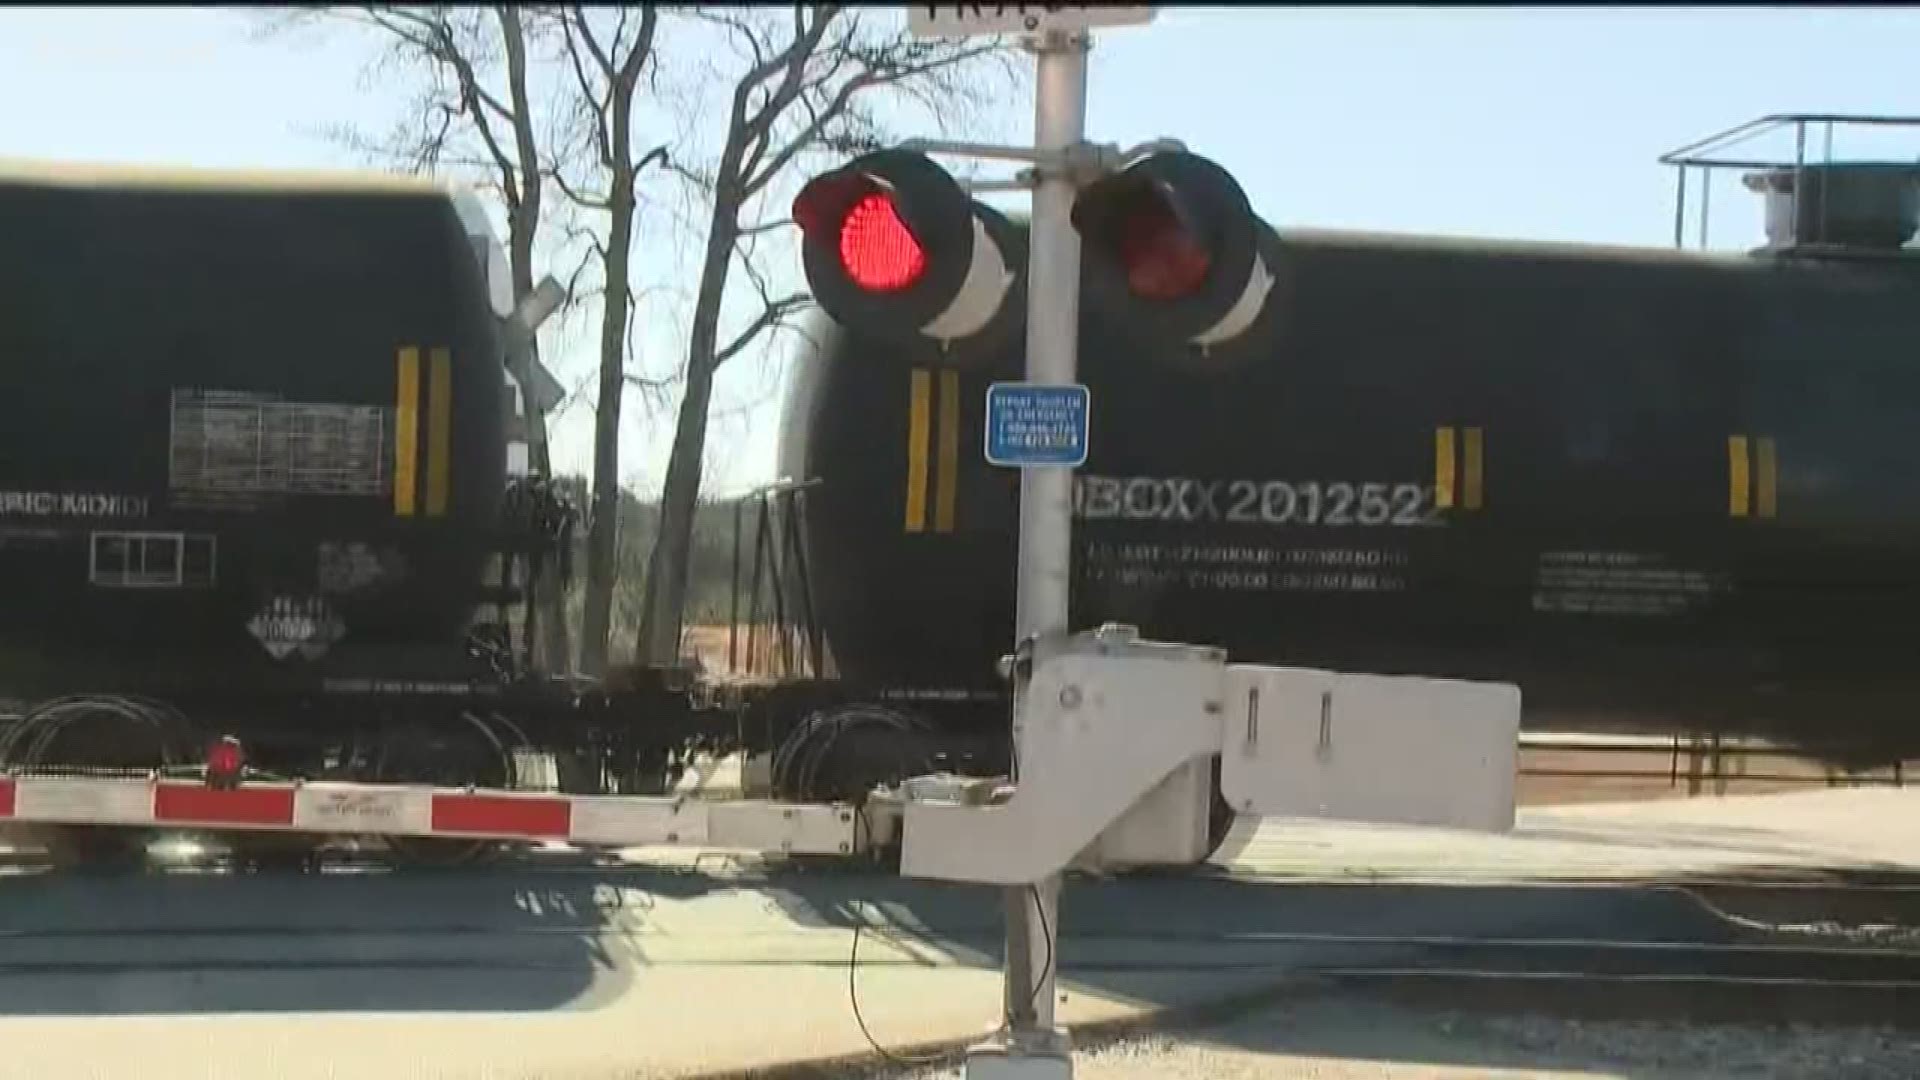 Last year complaints about stalled trains jumped 259% in Georgia.